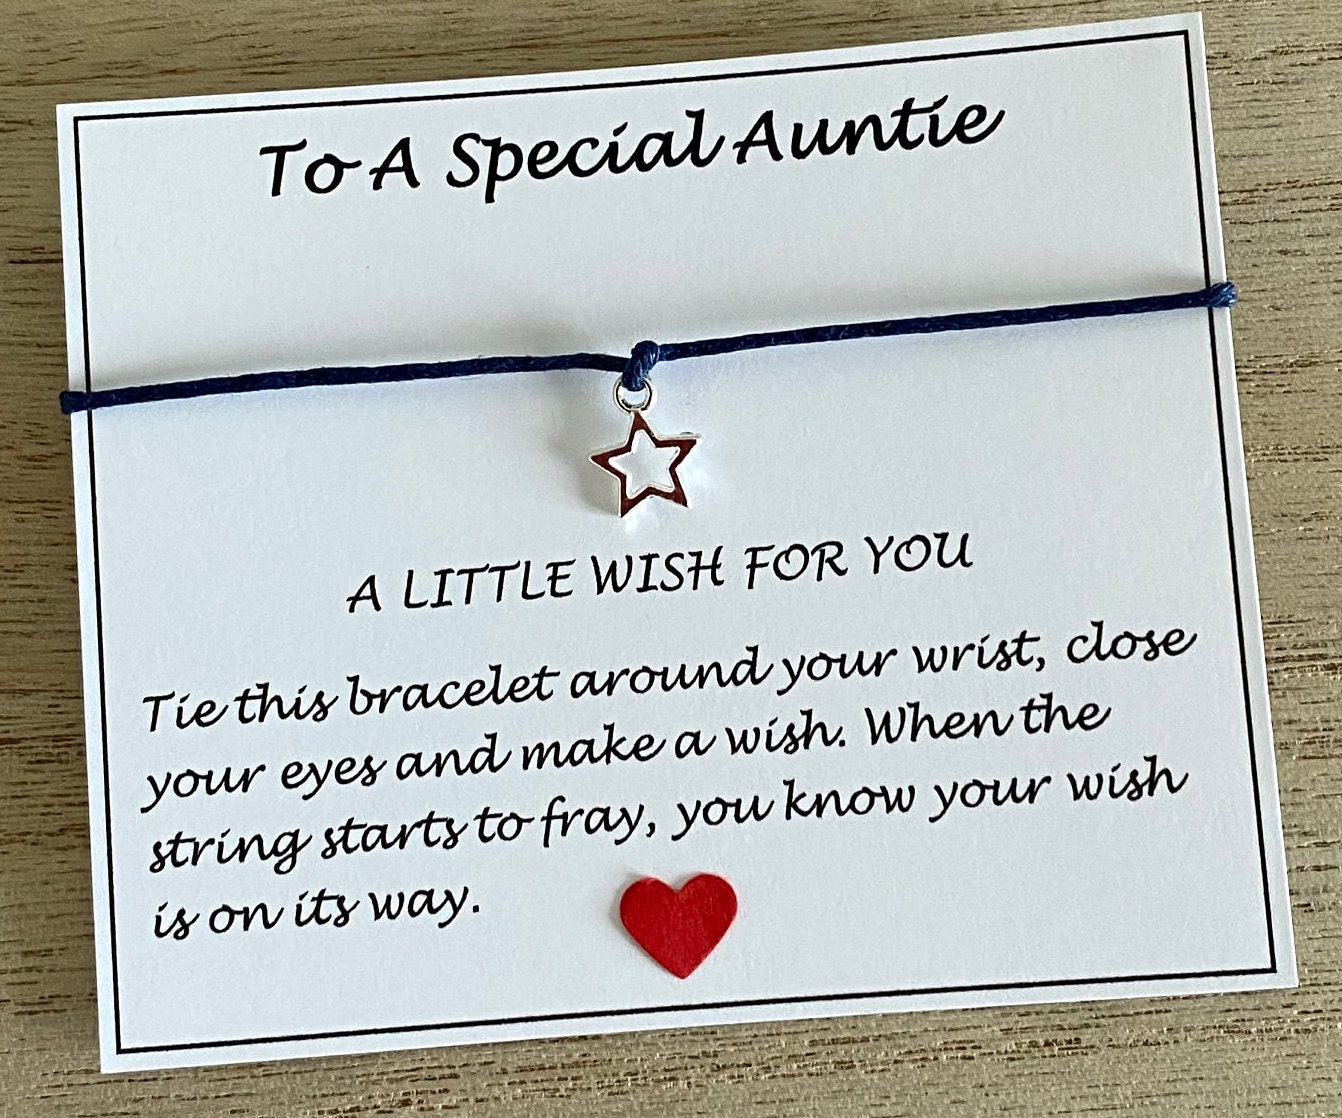 61 Awesome Happy Birthday Auntie Wishes, Messages and Quotes - Someone Sent  You A Greeting | Happy birthday auntie, Happy birthday aunt, Cute birthday  wishes